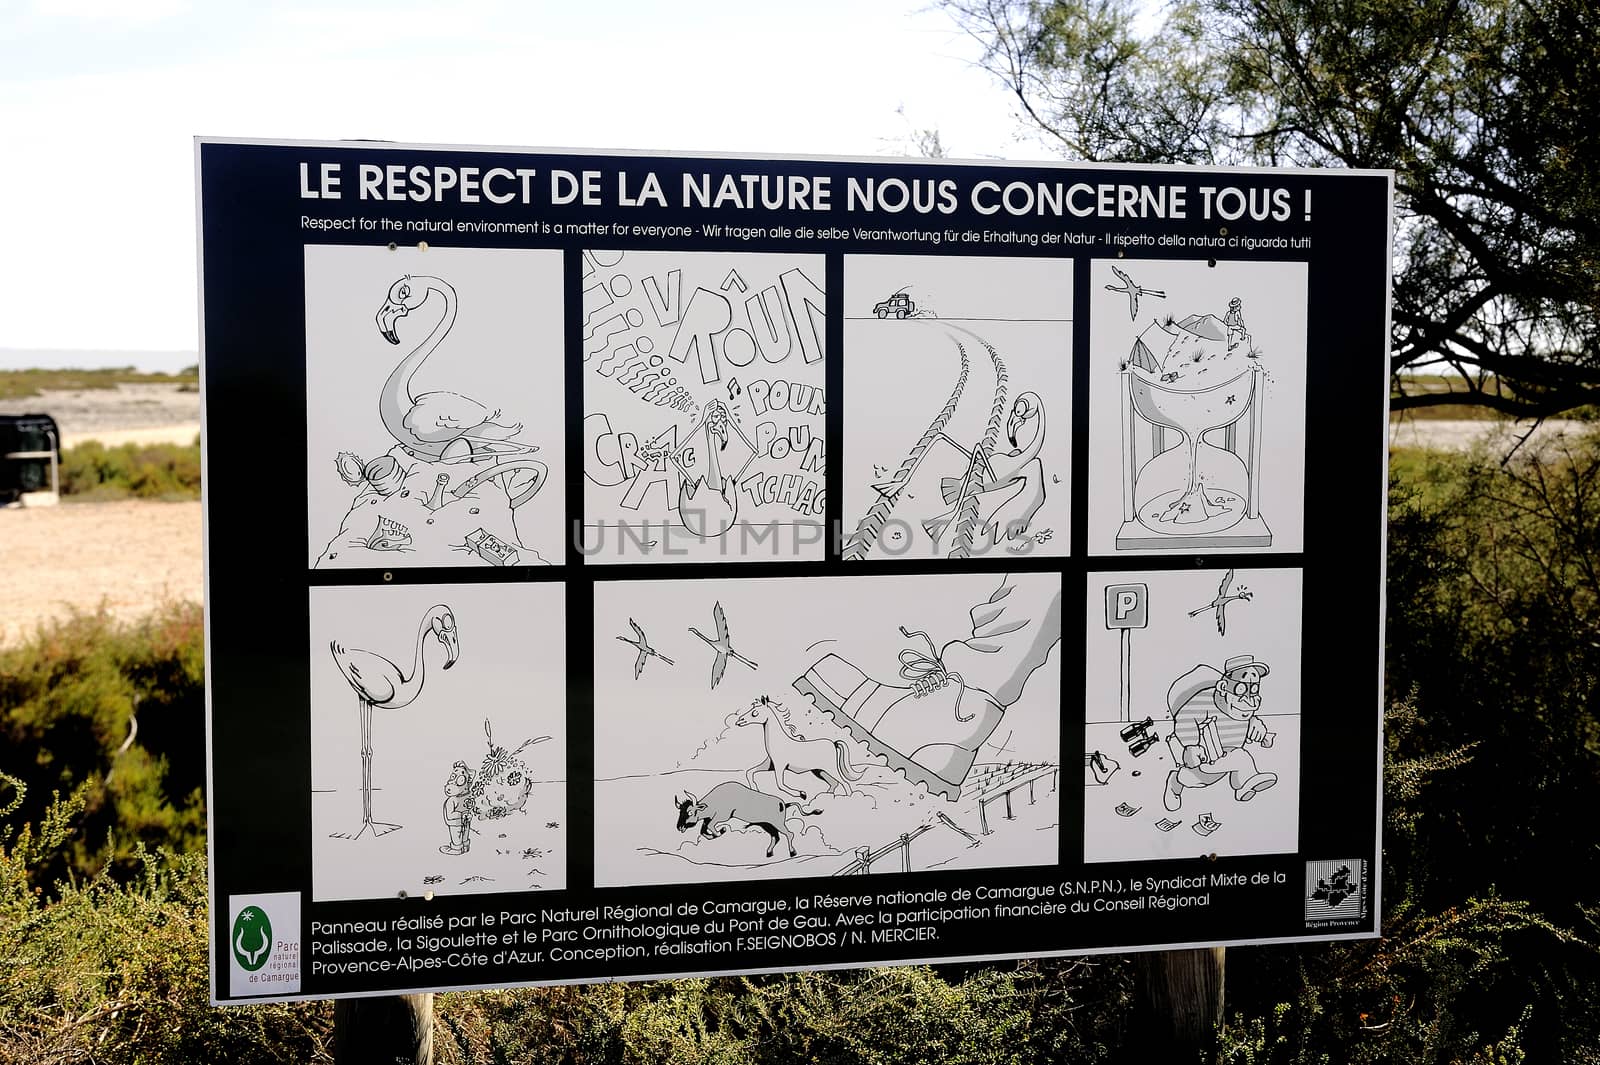 Panel recalling the rules of conduct for the protection of nature in Camargue.